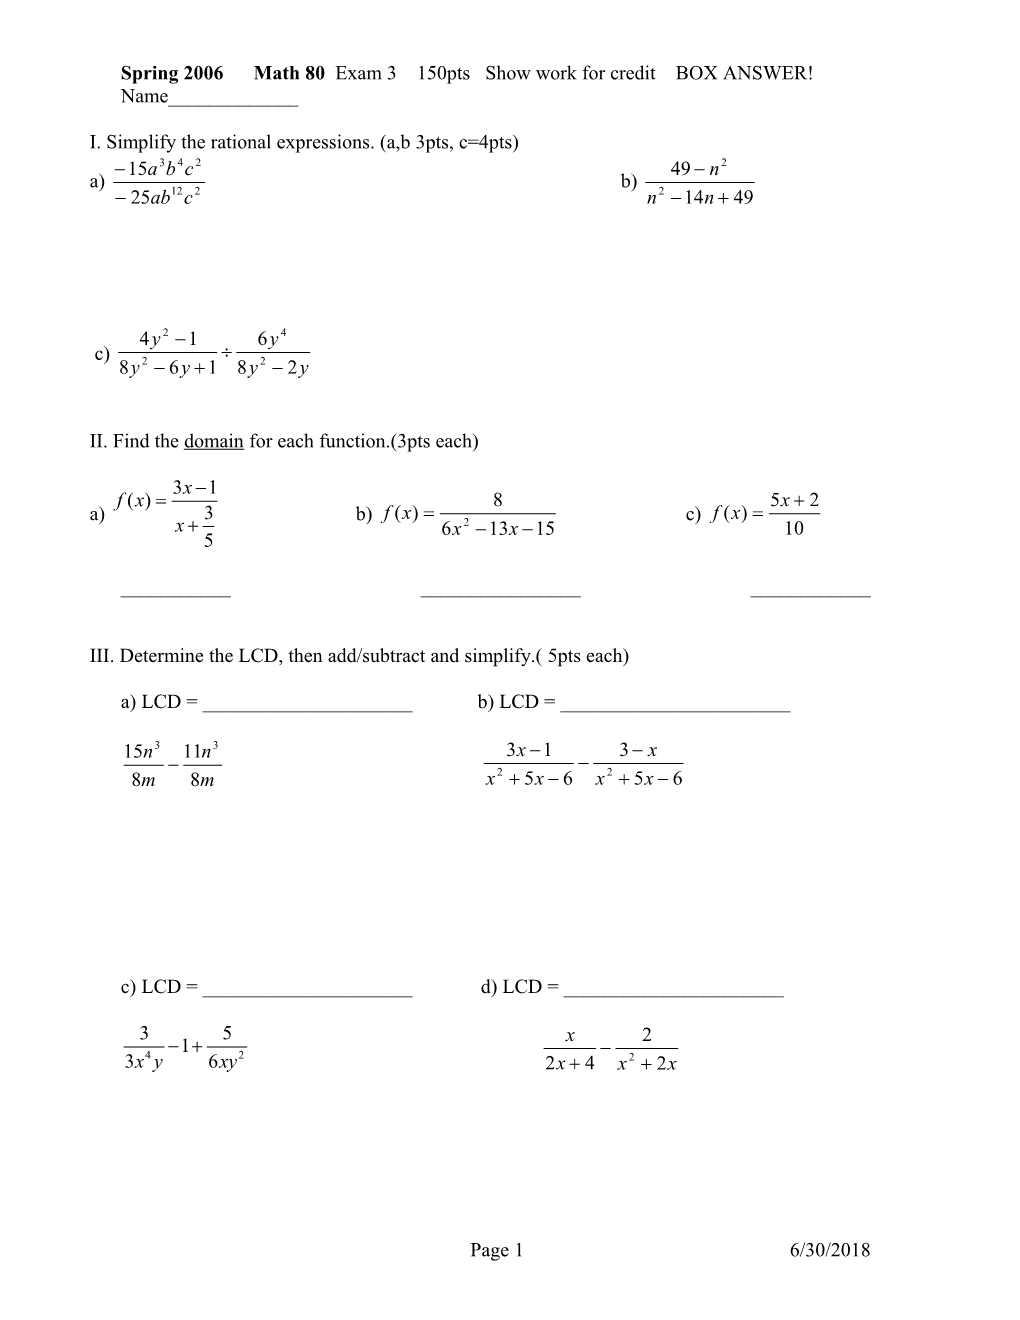 Spring 2006 Math 80 Exam 3 150Pts Show Work for Credit BOX ANSWER! Name______